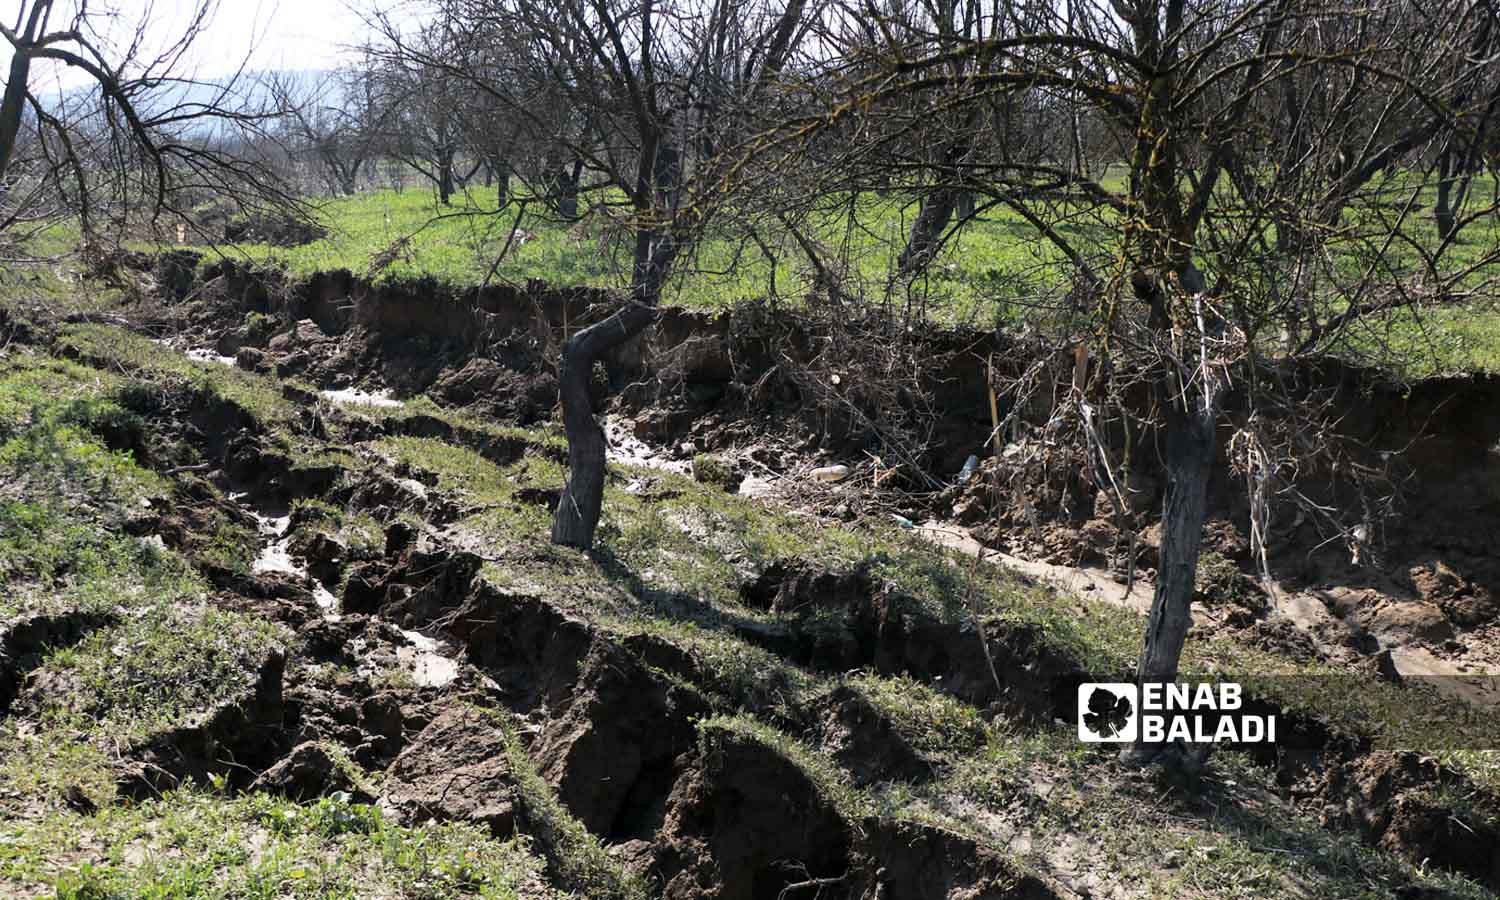 Landslides and faults in agricultural lands towards the Orontes (Asi) River in Darkush, in the western countryside of Idlib, as a result of the earthquake that struck the region - February 17, 2023 (Enab Baladi - Mohammad Nasan Dabel)